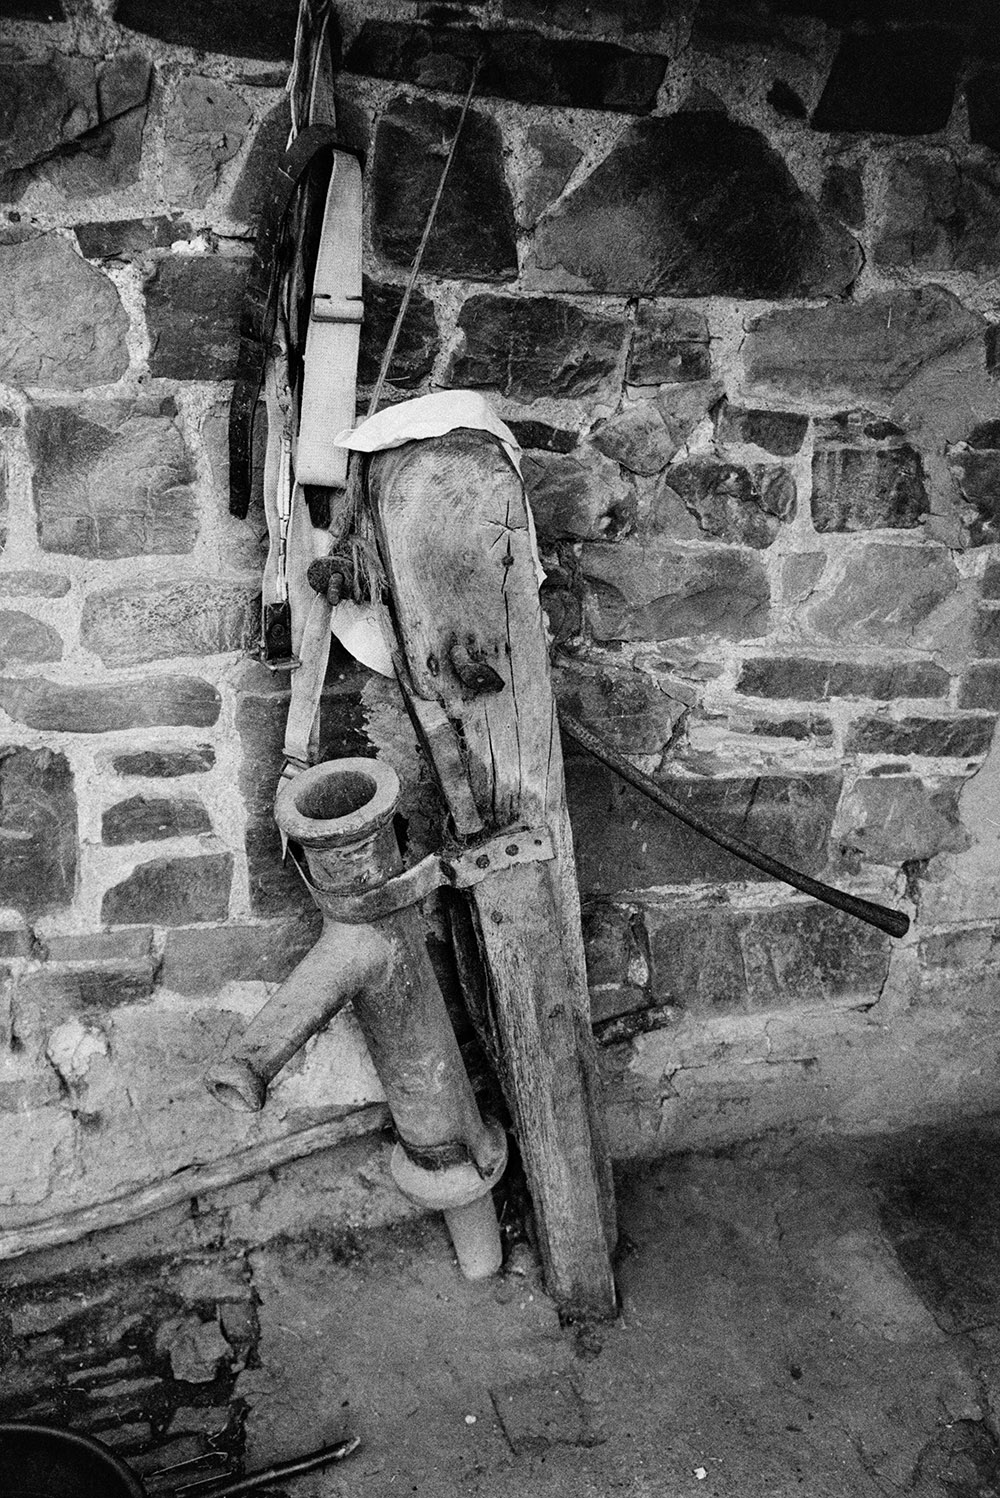 A hand pump by a stone wall at Kingscott.